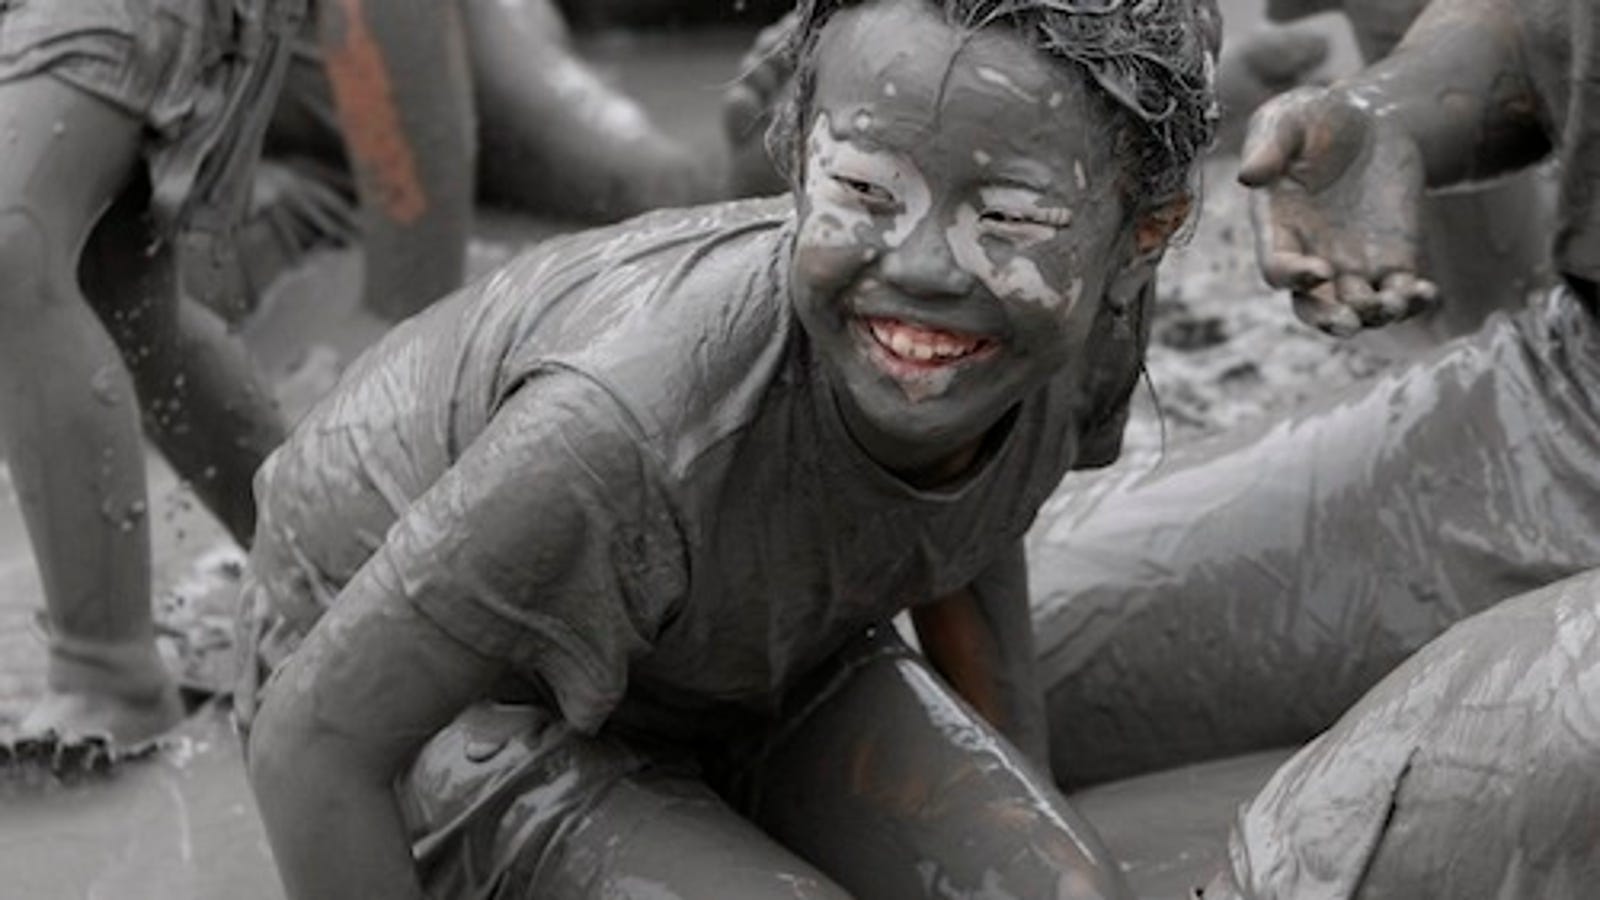 Another Mud Festival, This Time In South Korea